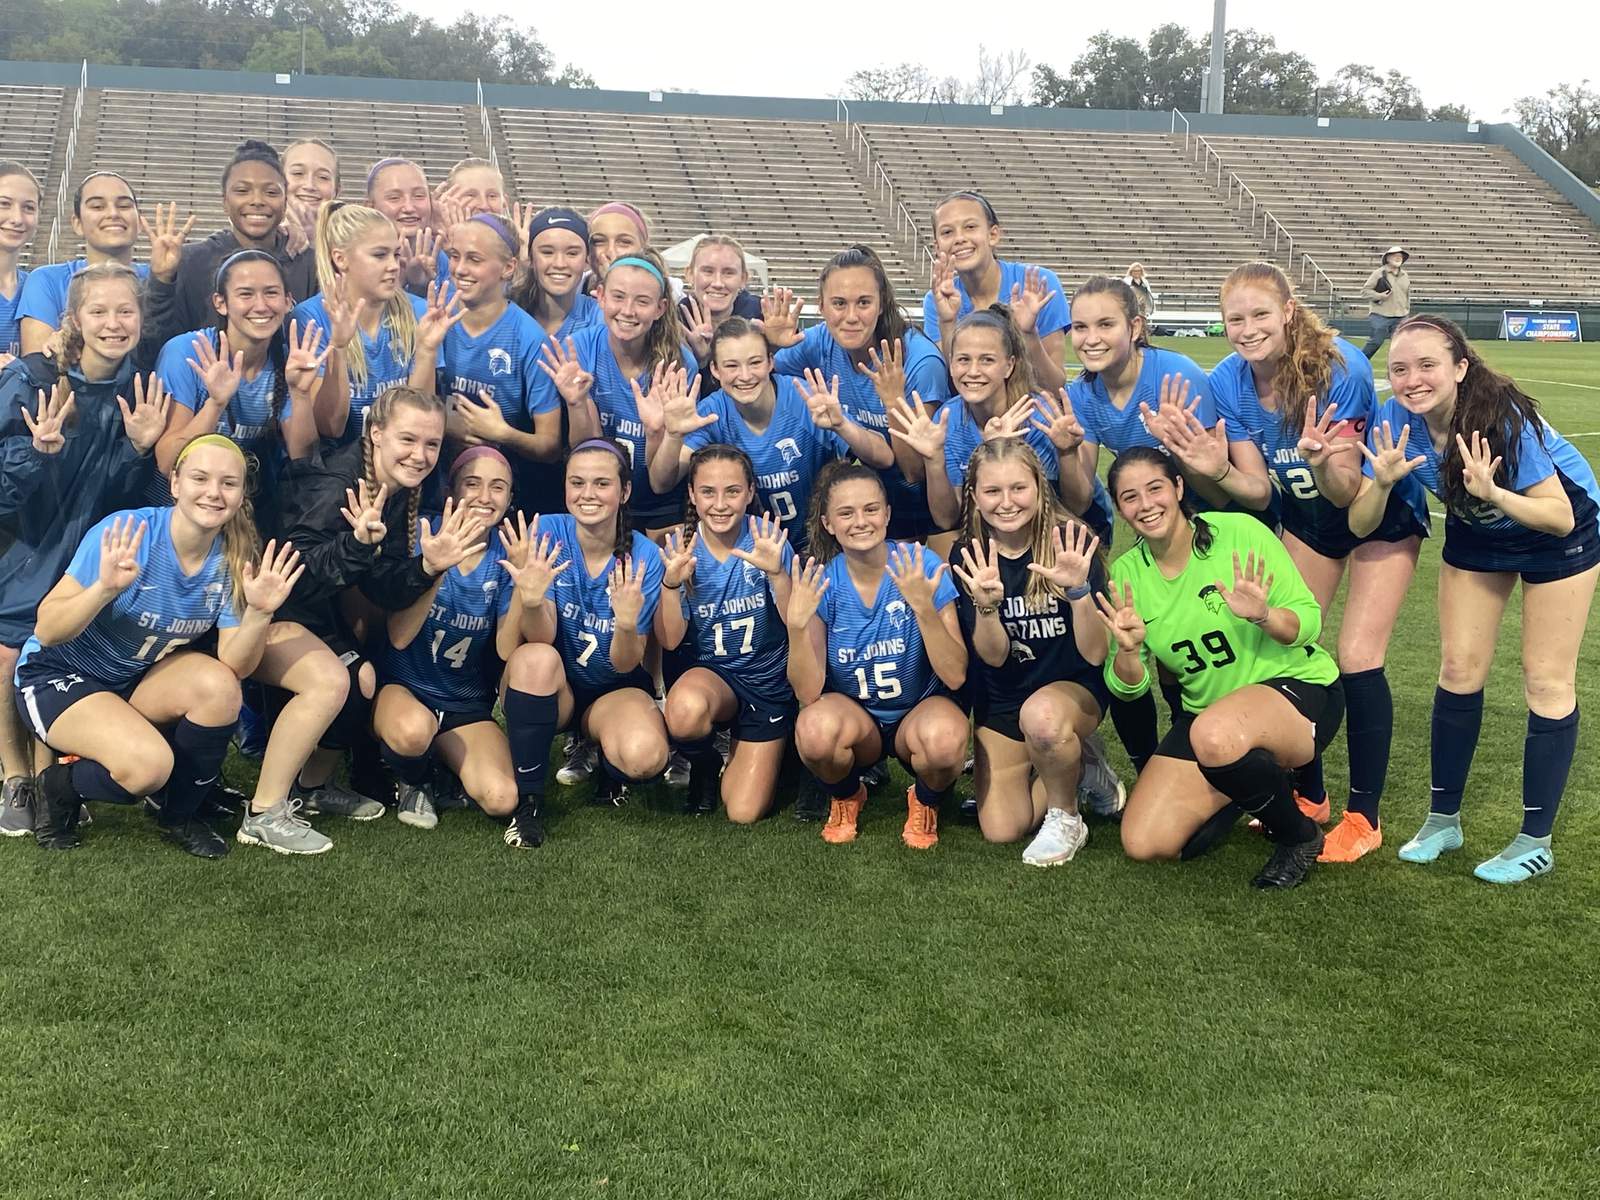 Soccer state championships: Four area teams all have titles within reach